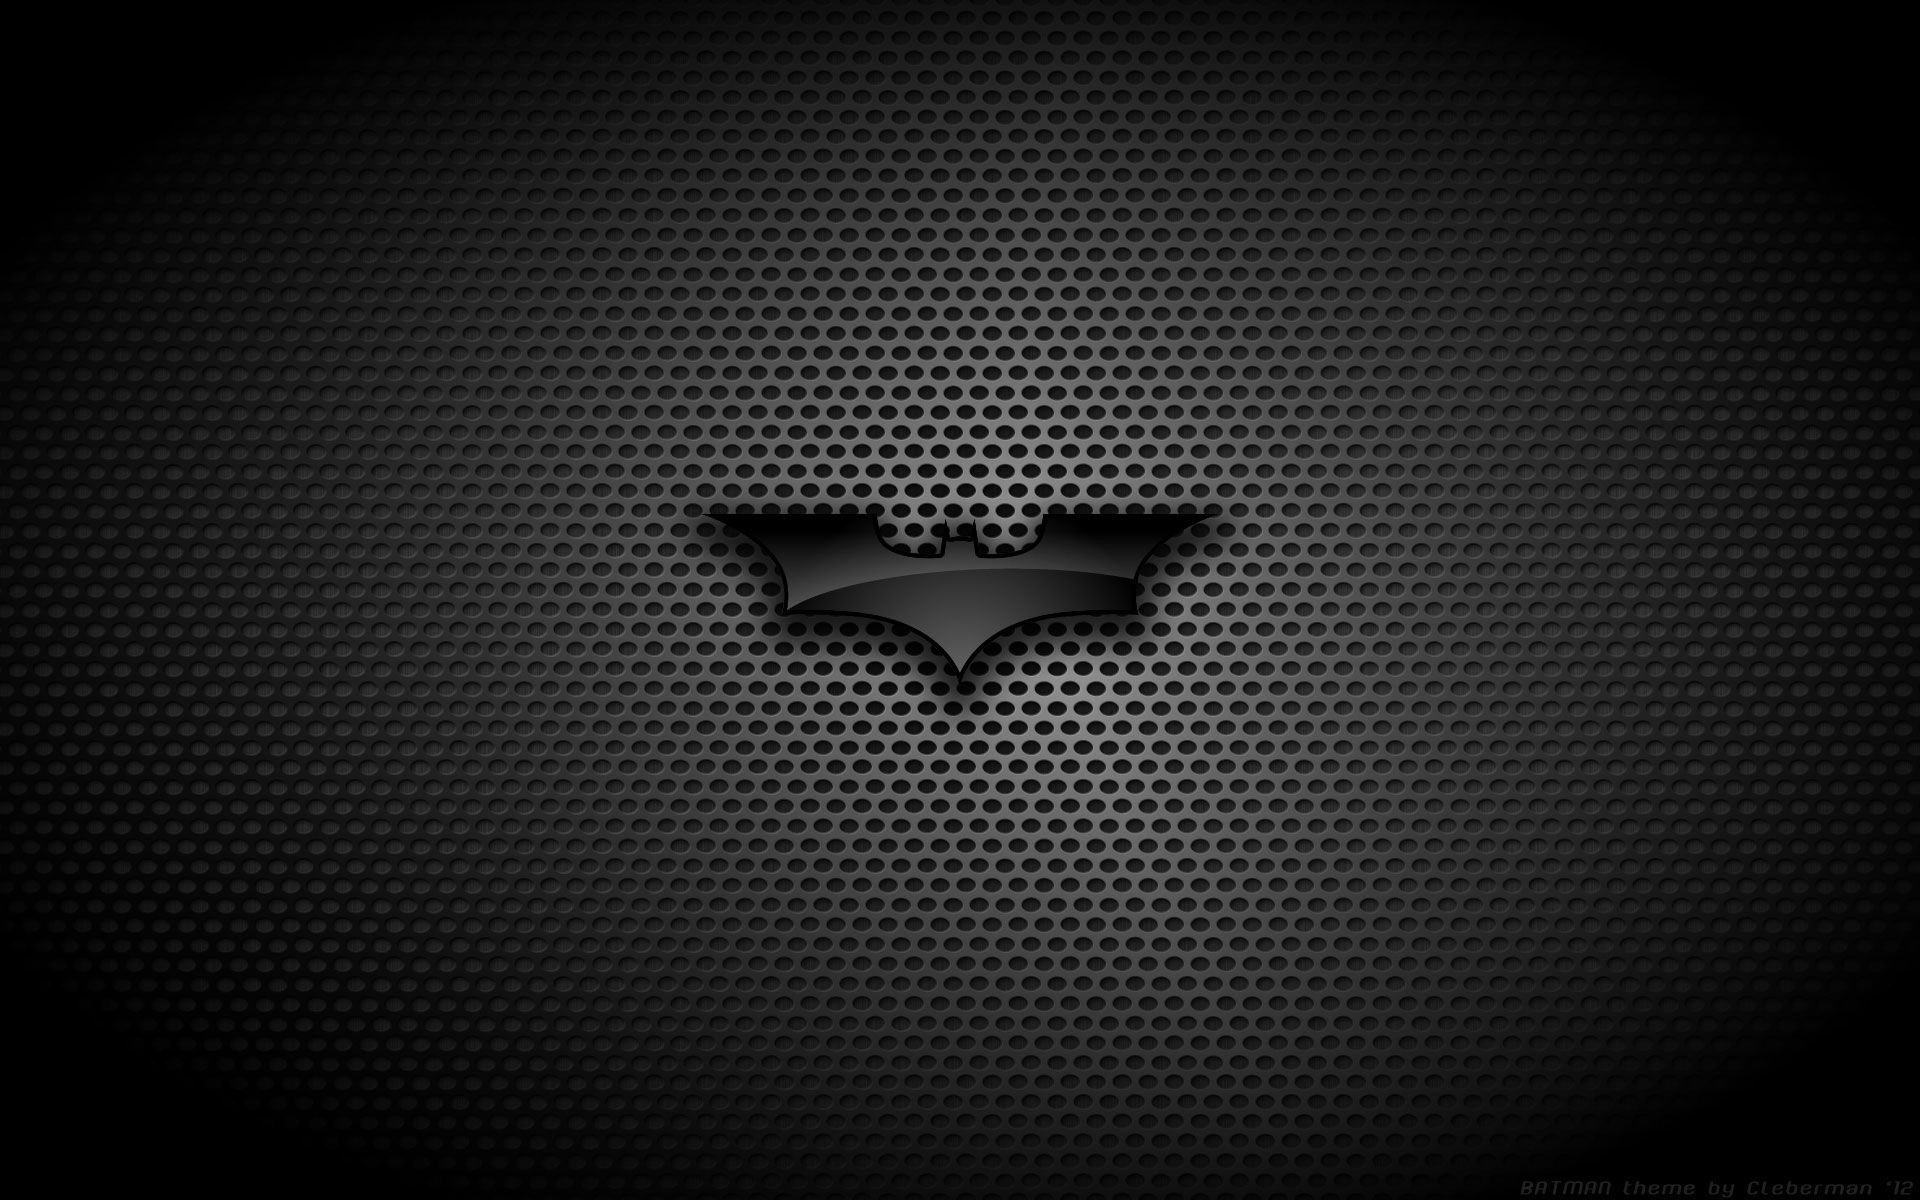 1920x1200 Title : batman wallpapers hd for android group (79+). Dimension : 1920 x  1200. File Type : JPG/JPEG